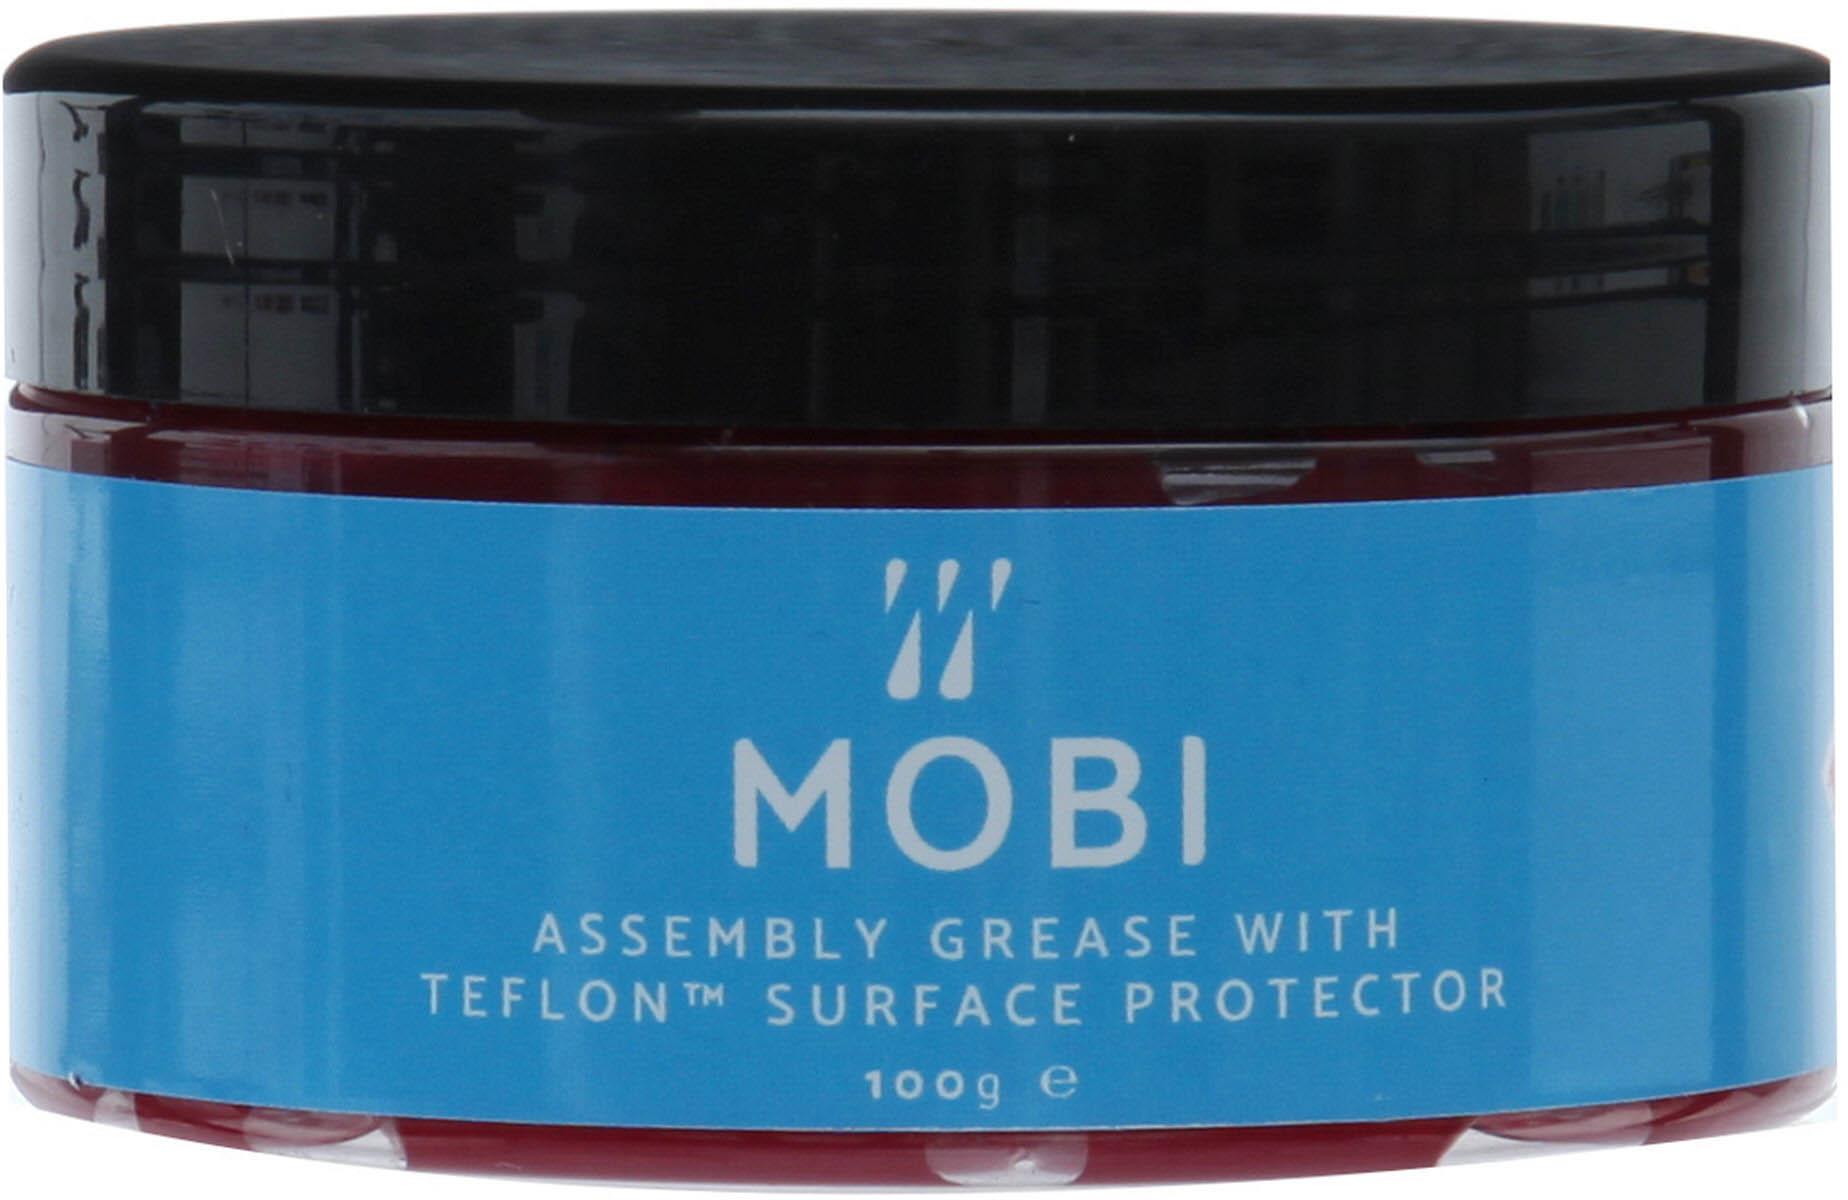 Mobi Assembly Grease With Teflon 100g - Neutral